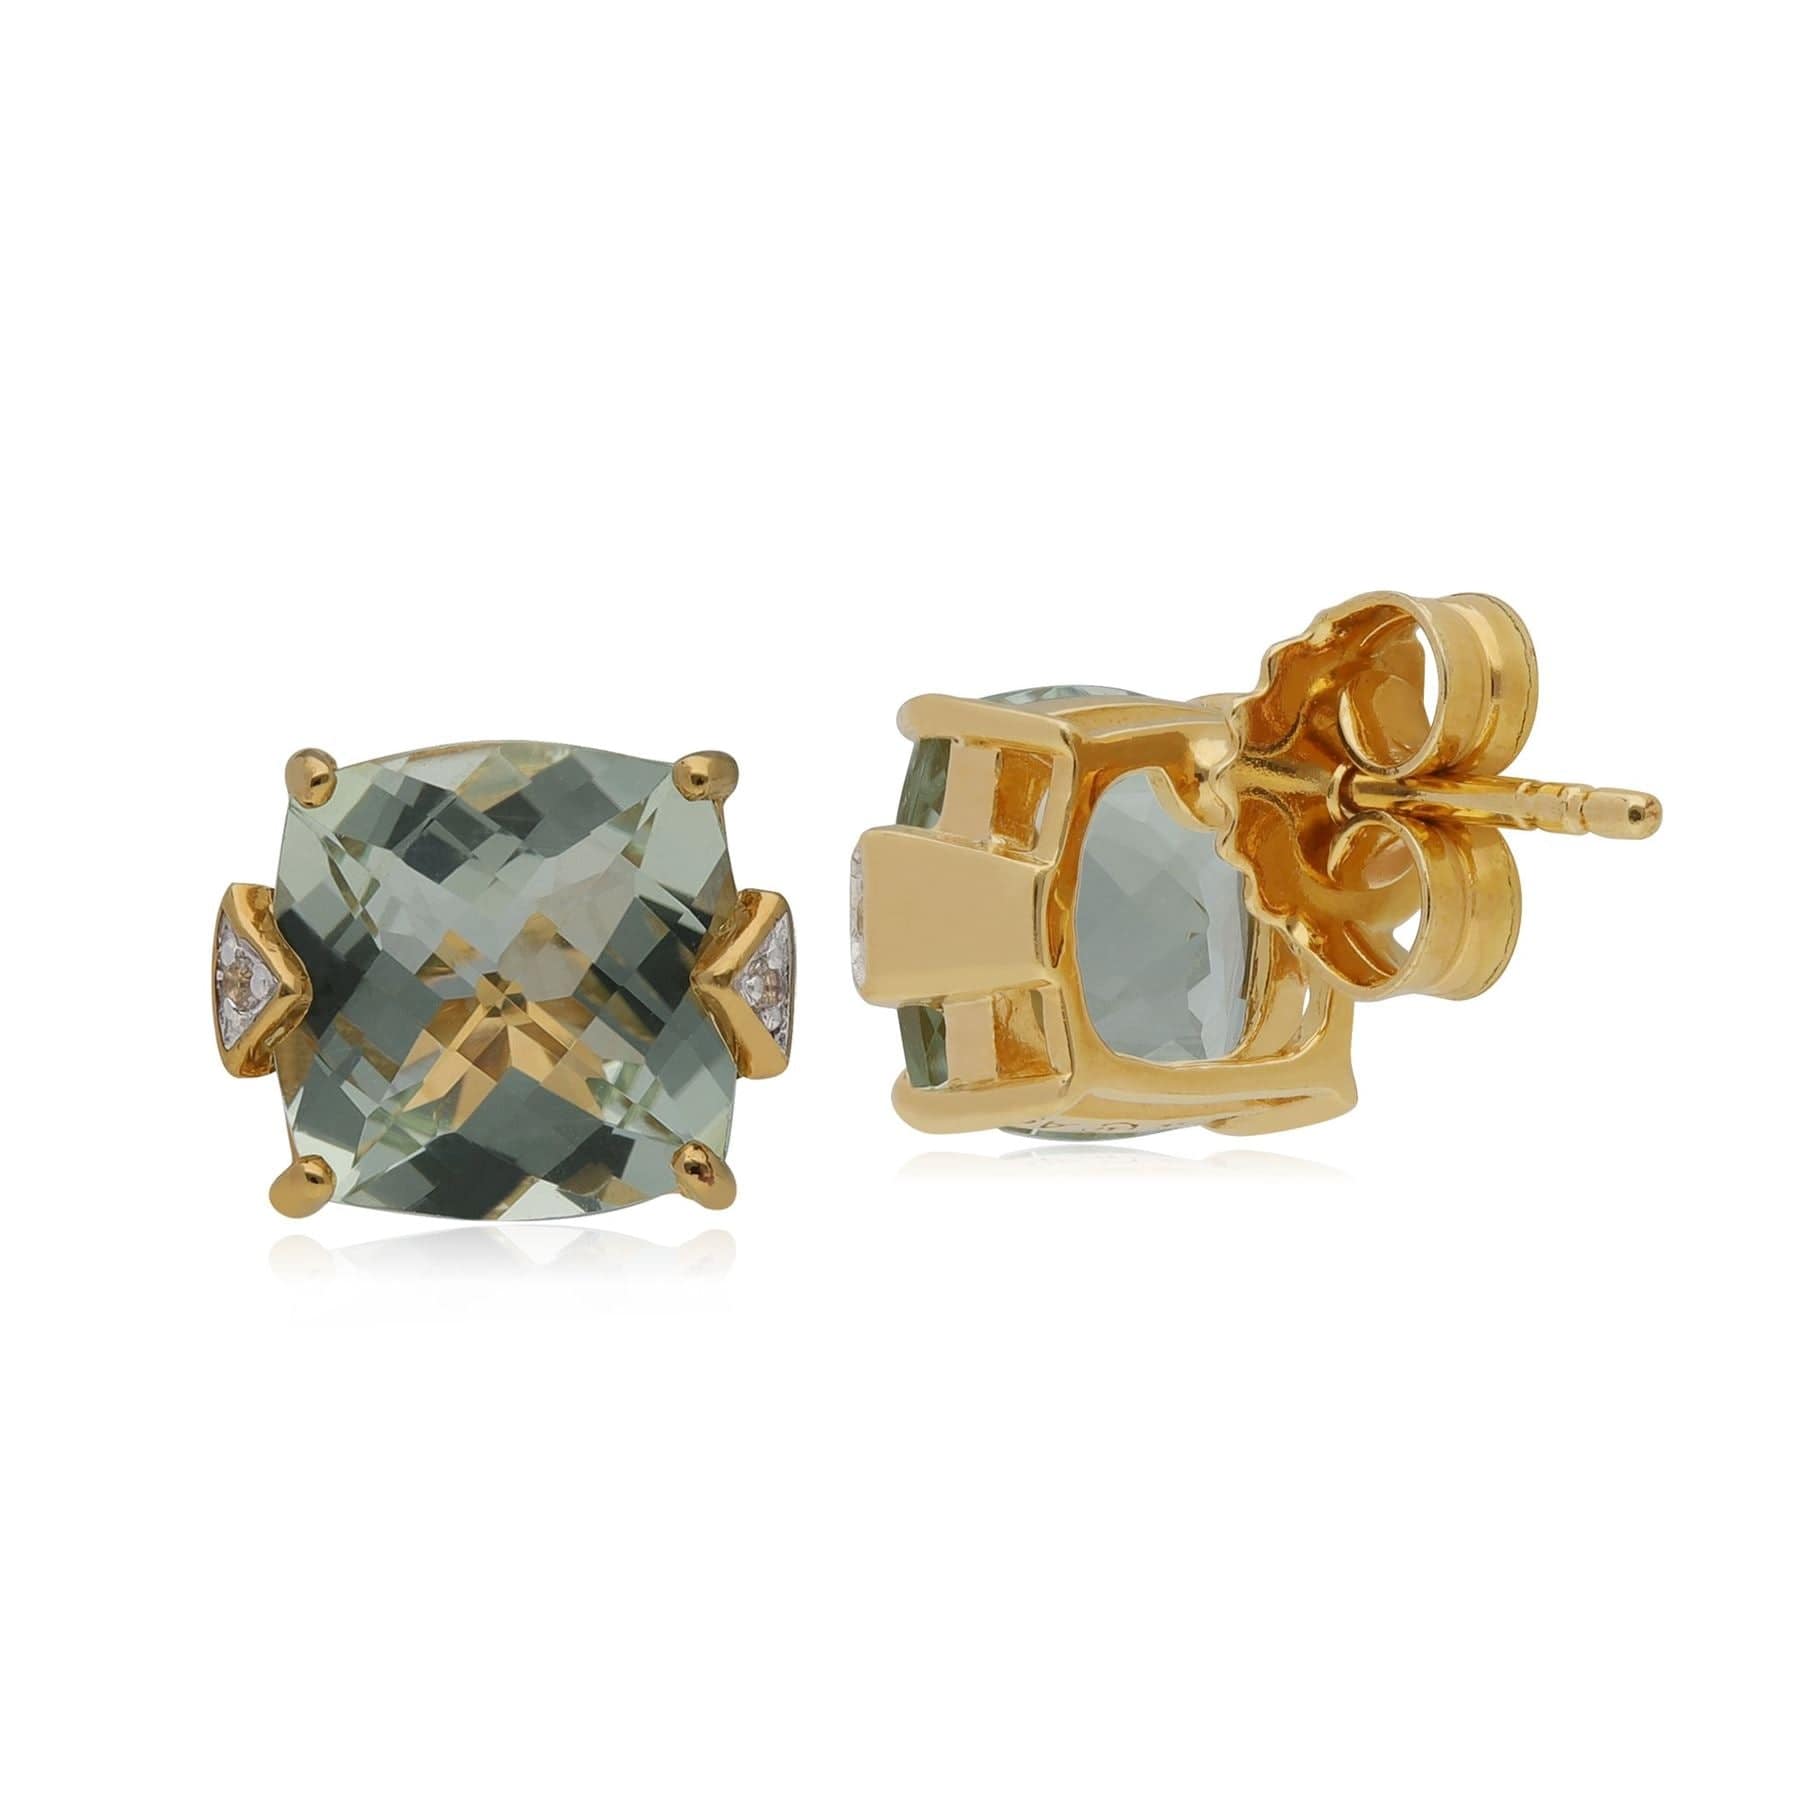 T1148E90T0 Kosmos Green Mint Quartz & Topaz Stud Earrings in Rose Gold Plated Sterling Silver 2